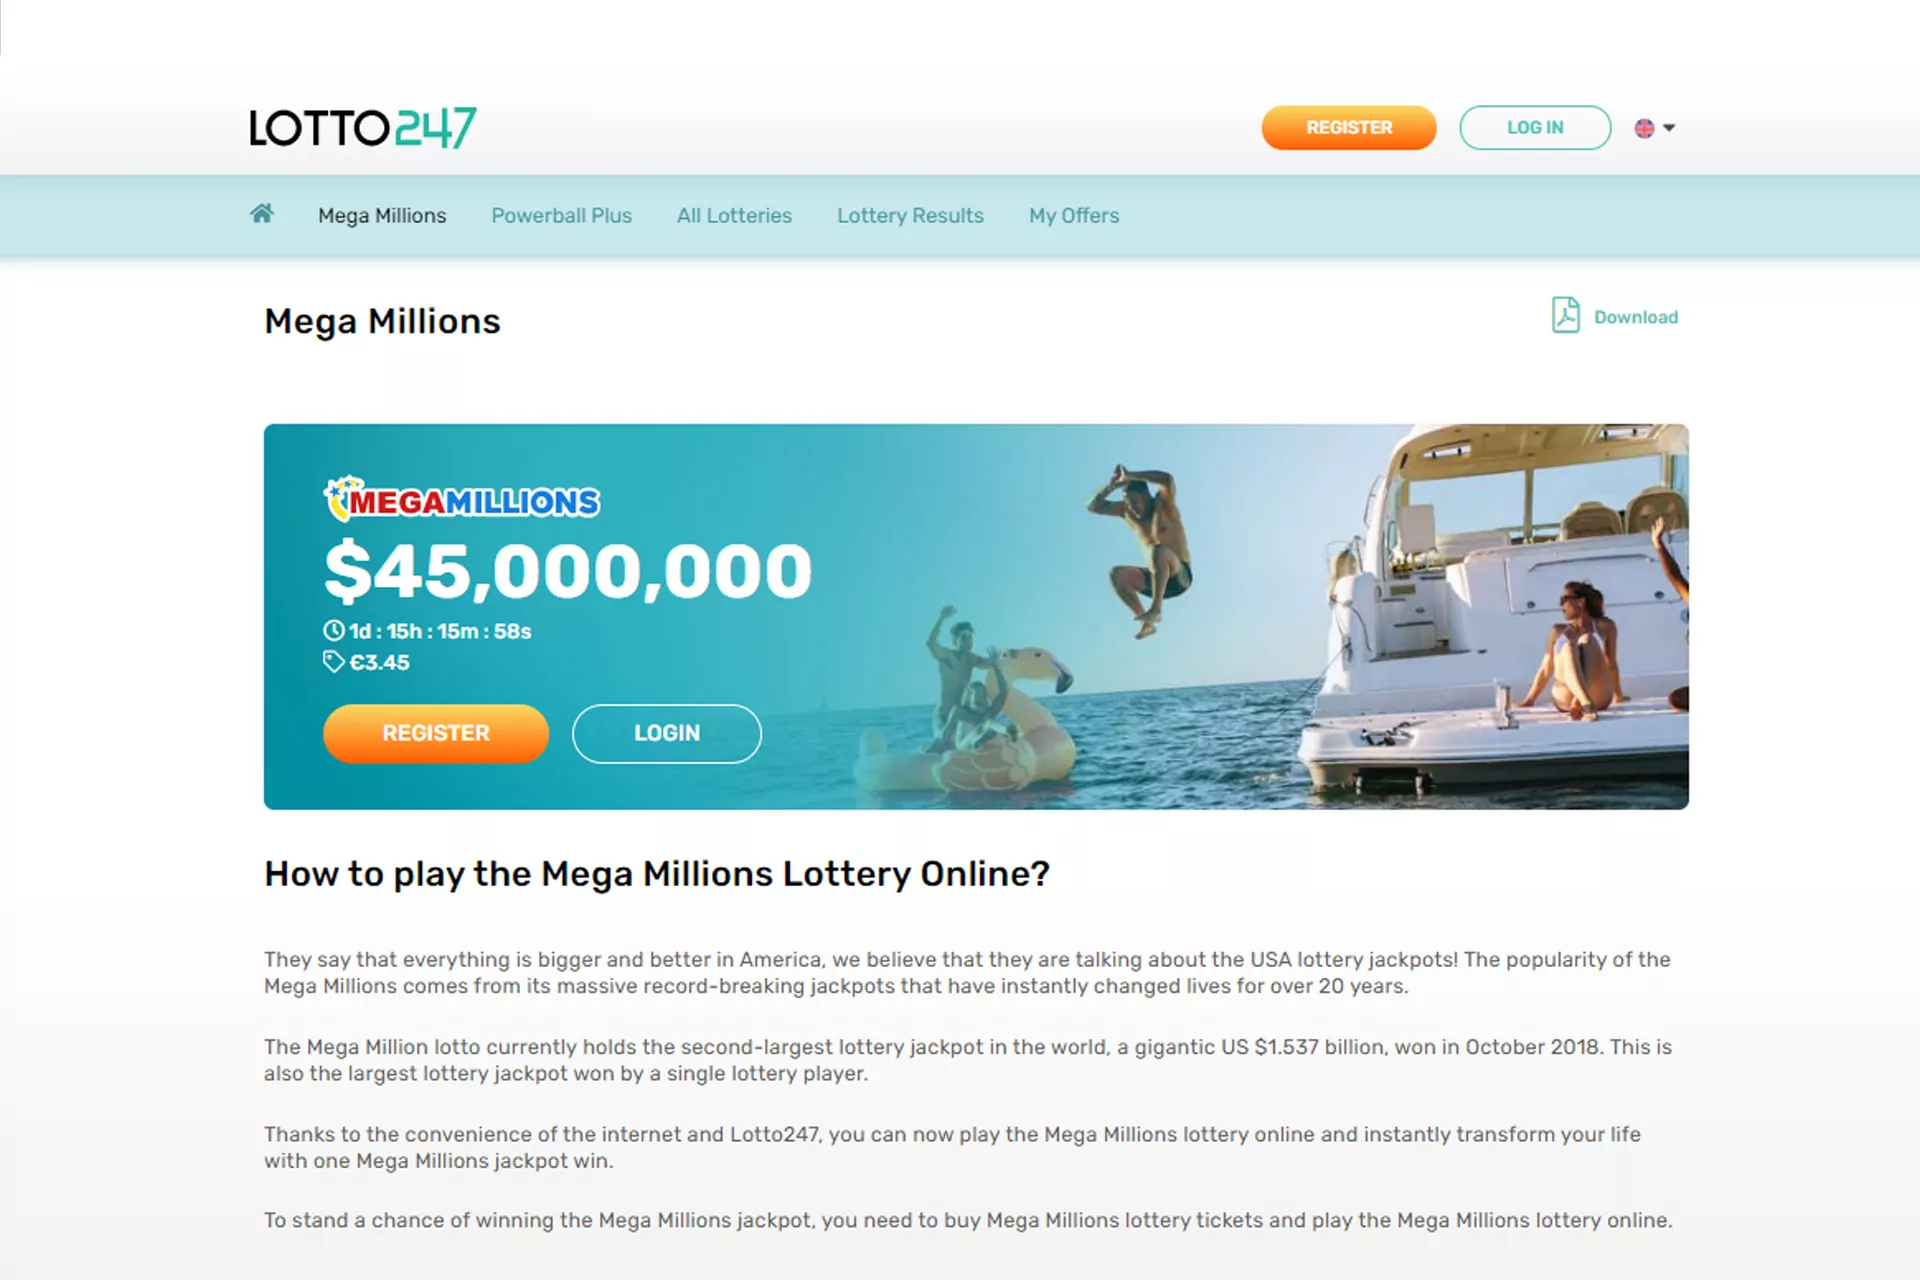 Players can participate in Mega Millions twice a week.